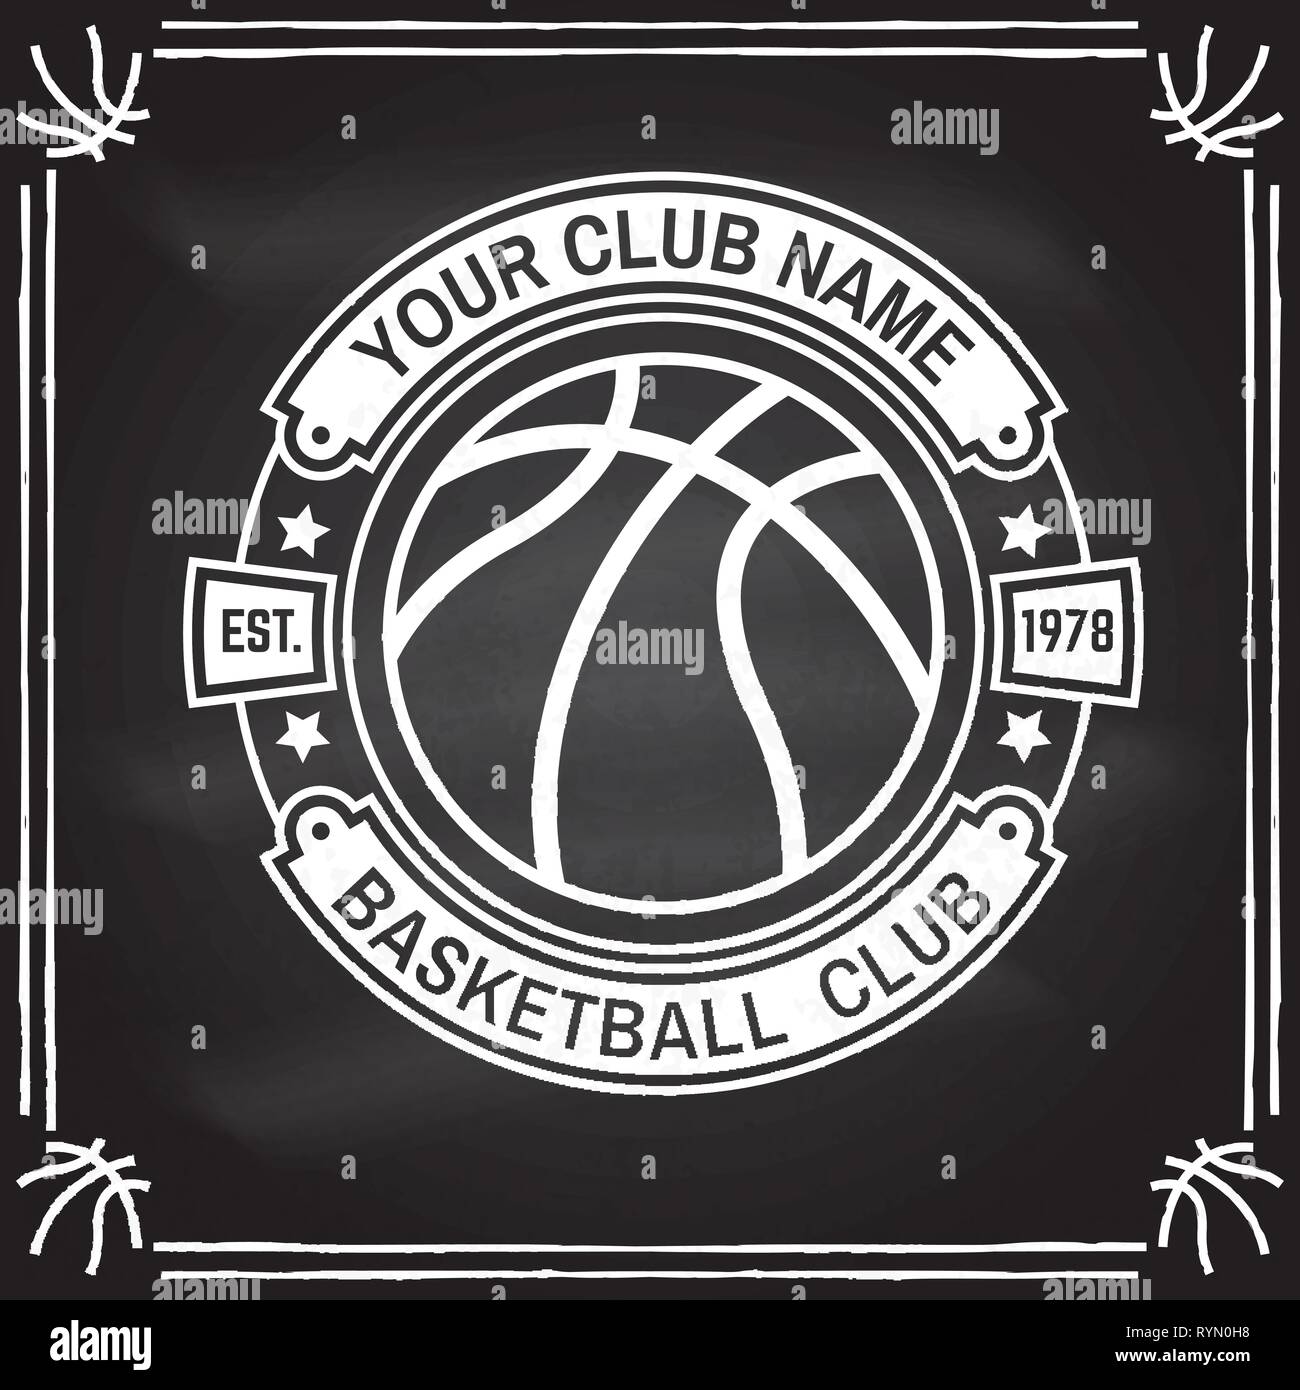 Basketball club badge on the chalkboard. Vector illustration. Concept for shirt, print, stamp. Vintage typography design with basketball ball silhouette. Stock Vector